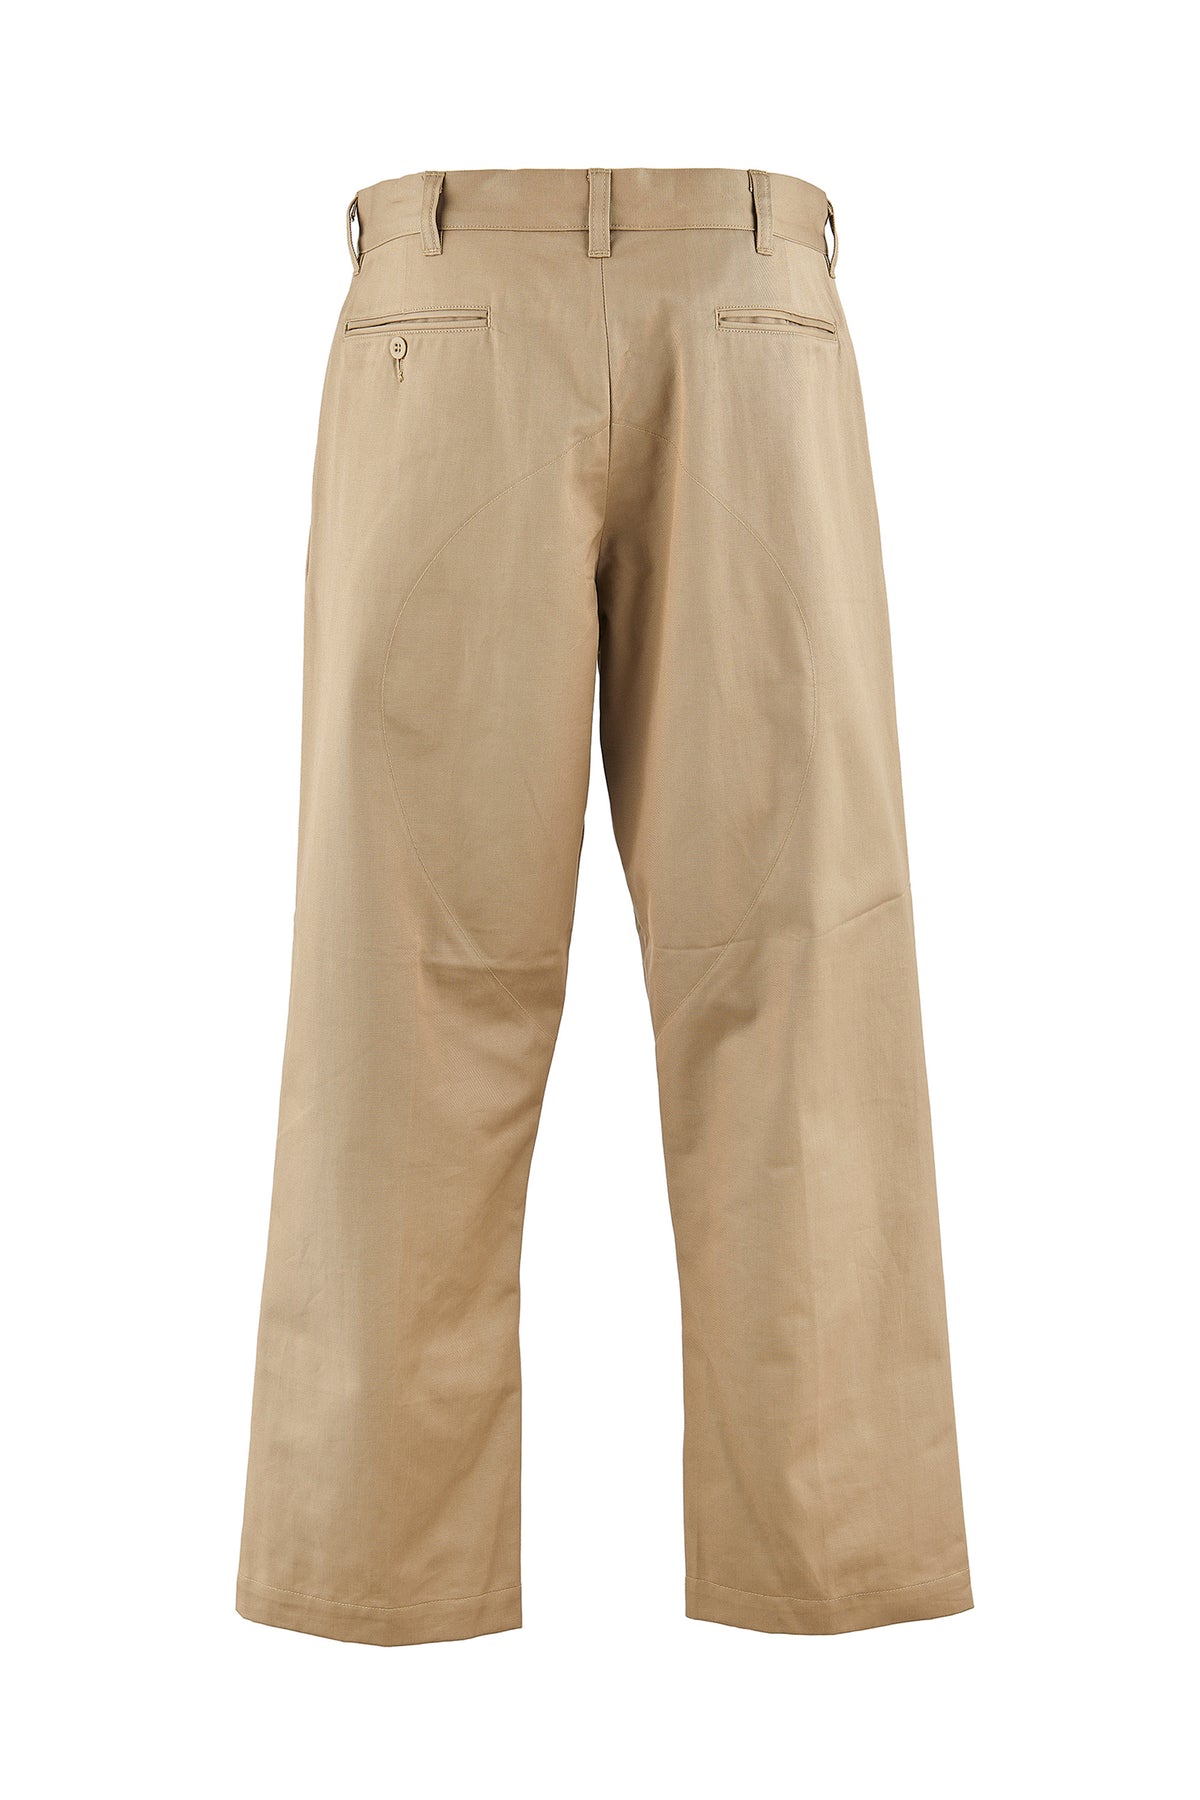 Rolanko Girls Cargo Pants Wide Leg Y2K Cargo Trousers with Pockets